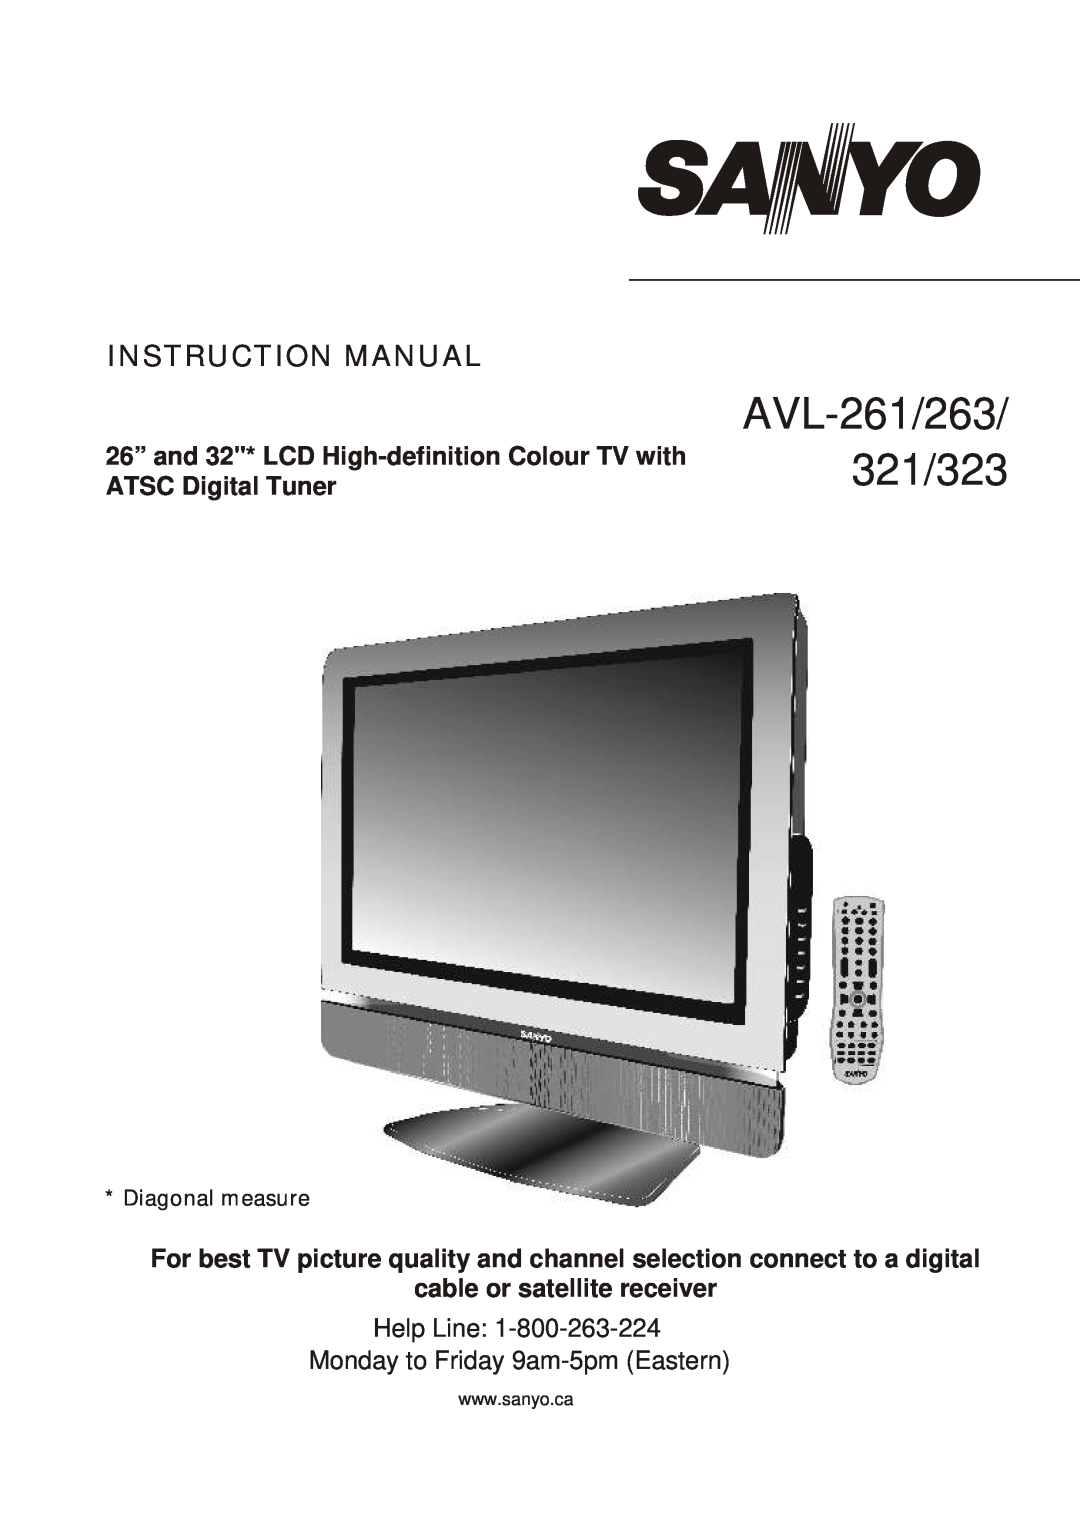 Sanyo 263, 323 instruction manual Instruction Manual, 26” and 32* LCD High-definition Colour TV with ATSC Digital Tuner 